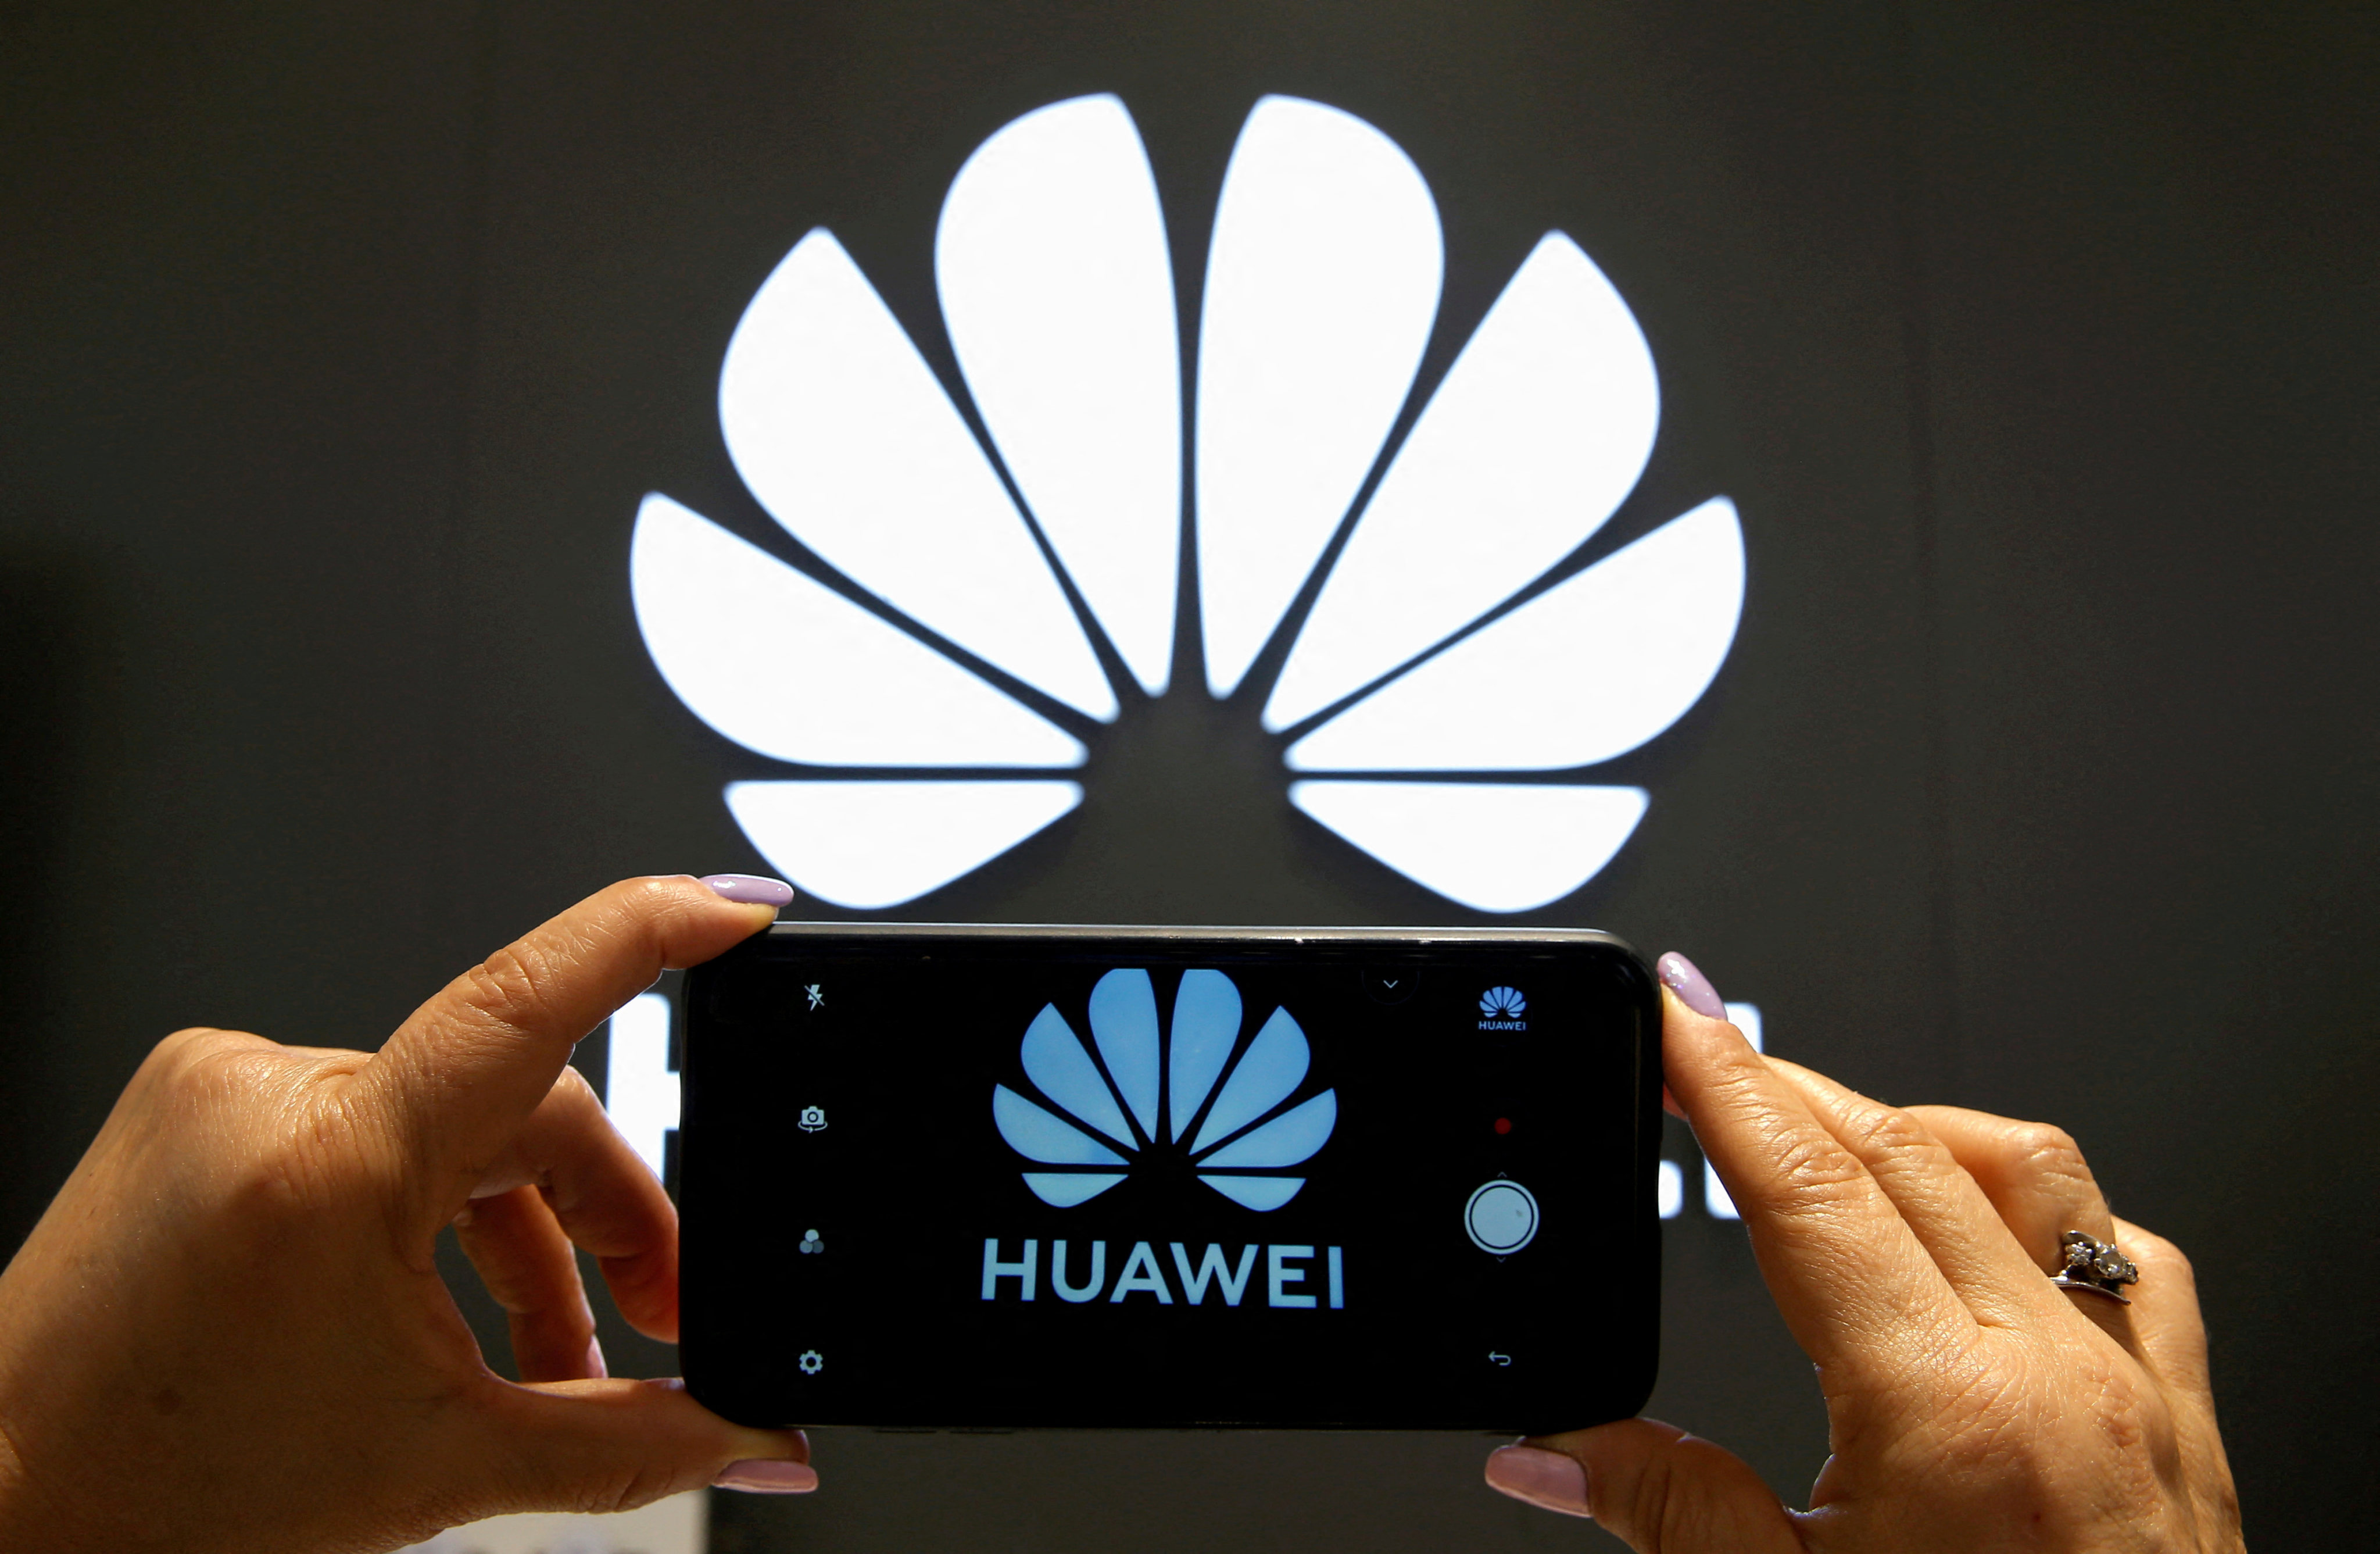 Before being sanctioned by the US, Huawei was a leading global smartphone brand. Photo: Reuters